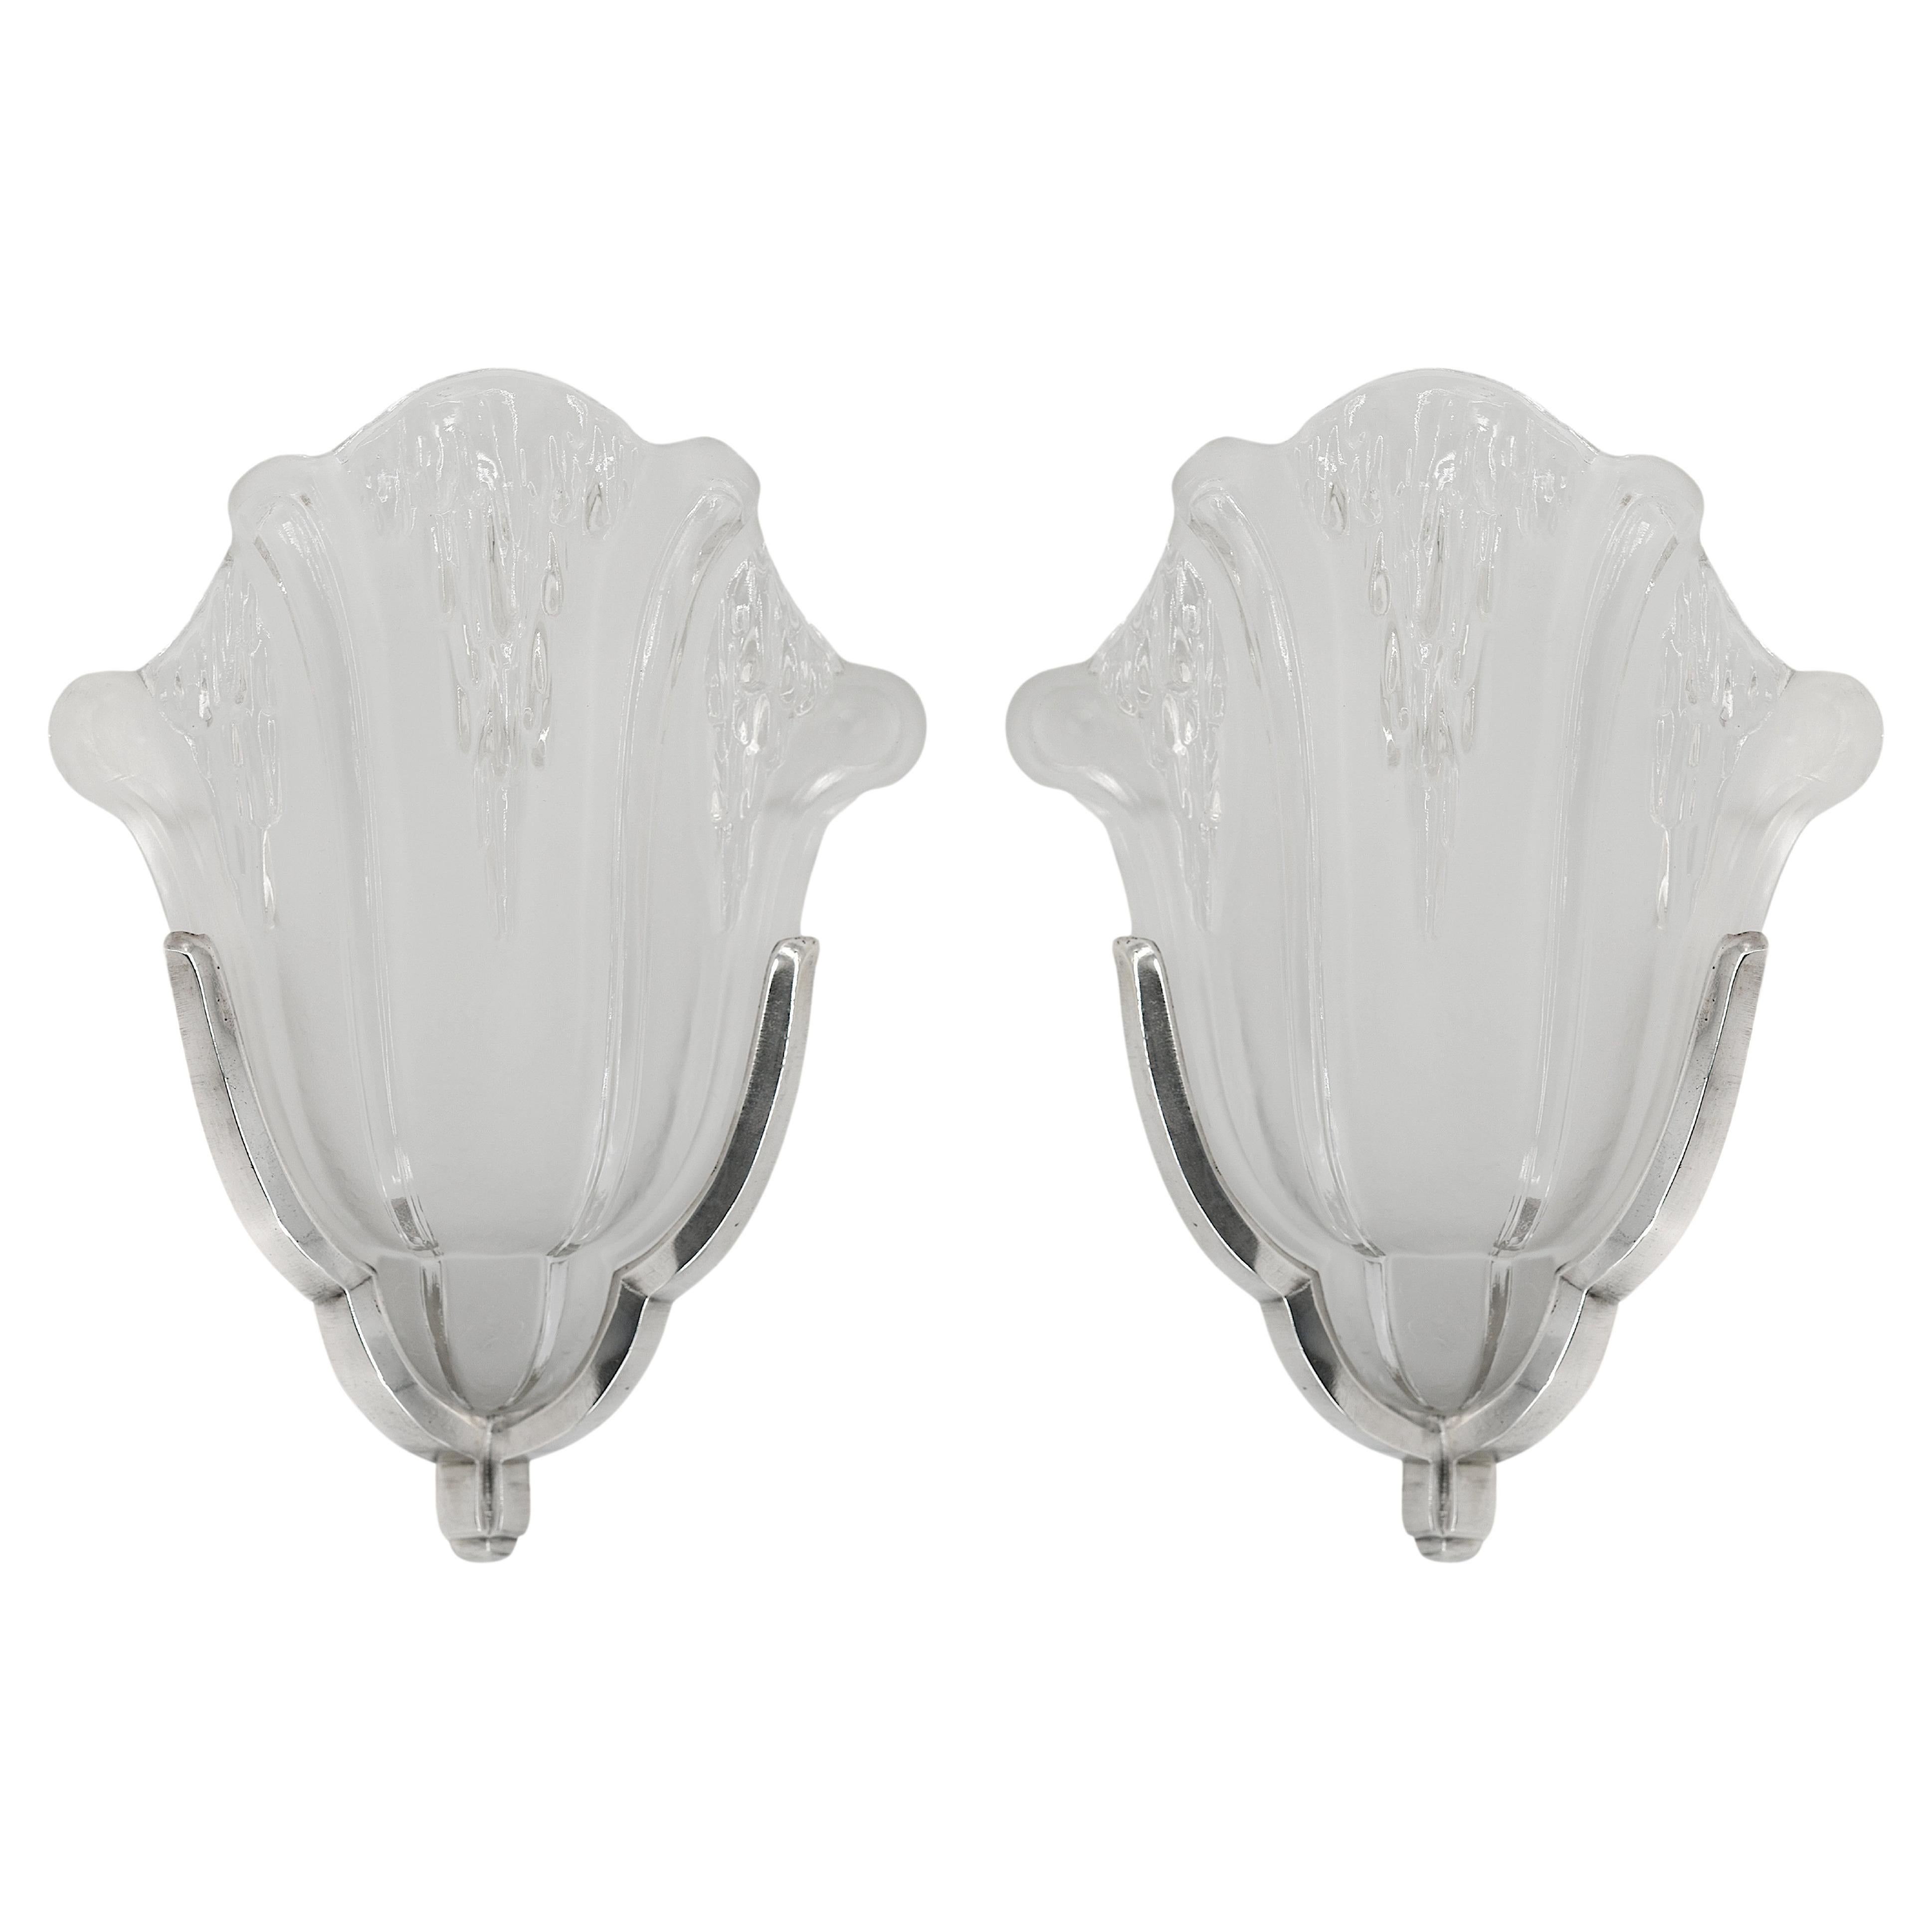 Jean Gauthier Art Deco French Pair of Corner Wall Sconces, 1930s For Sale